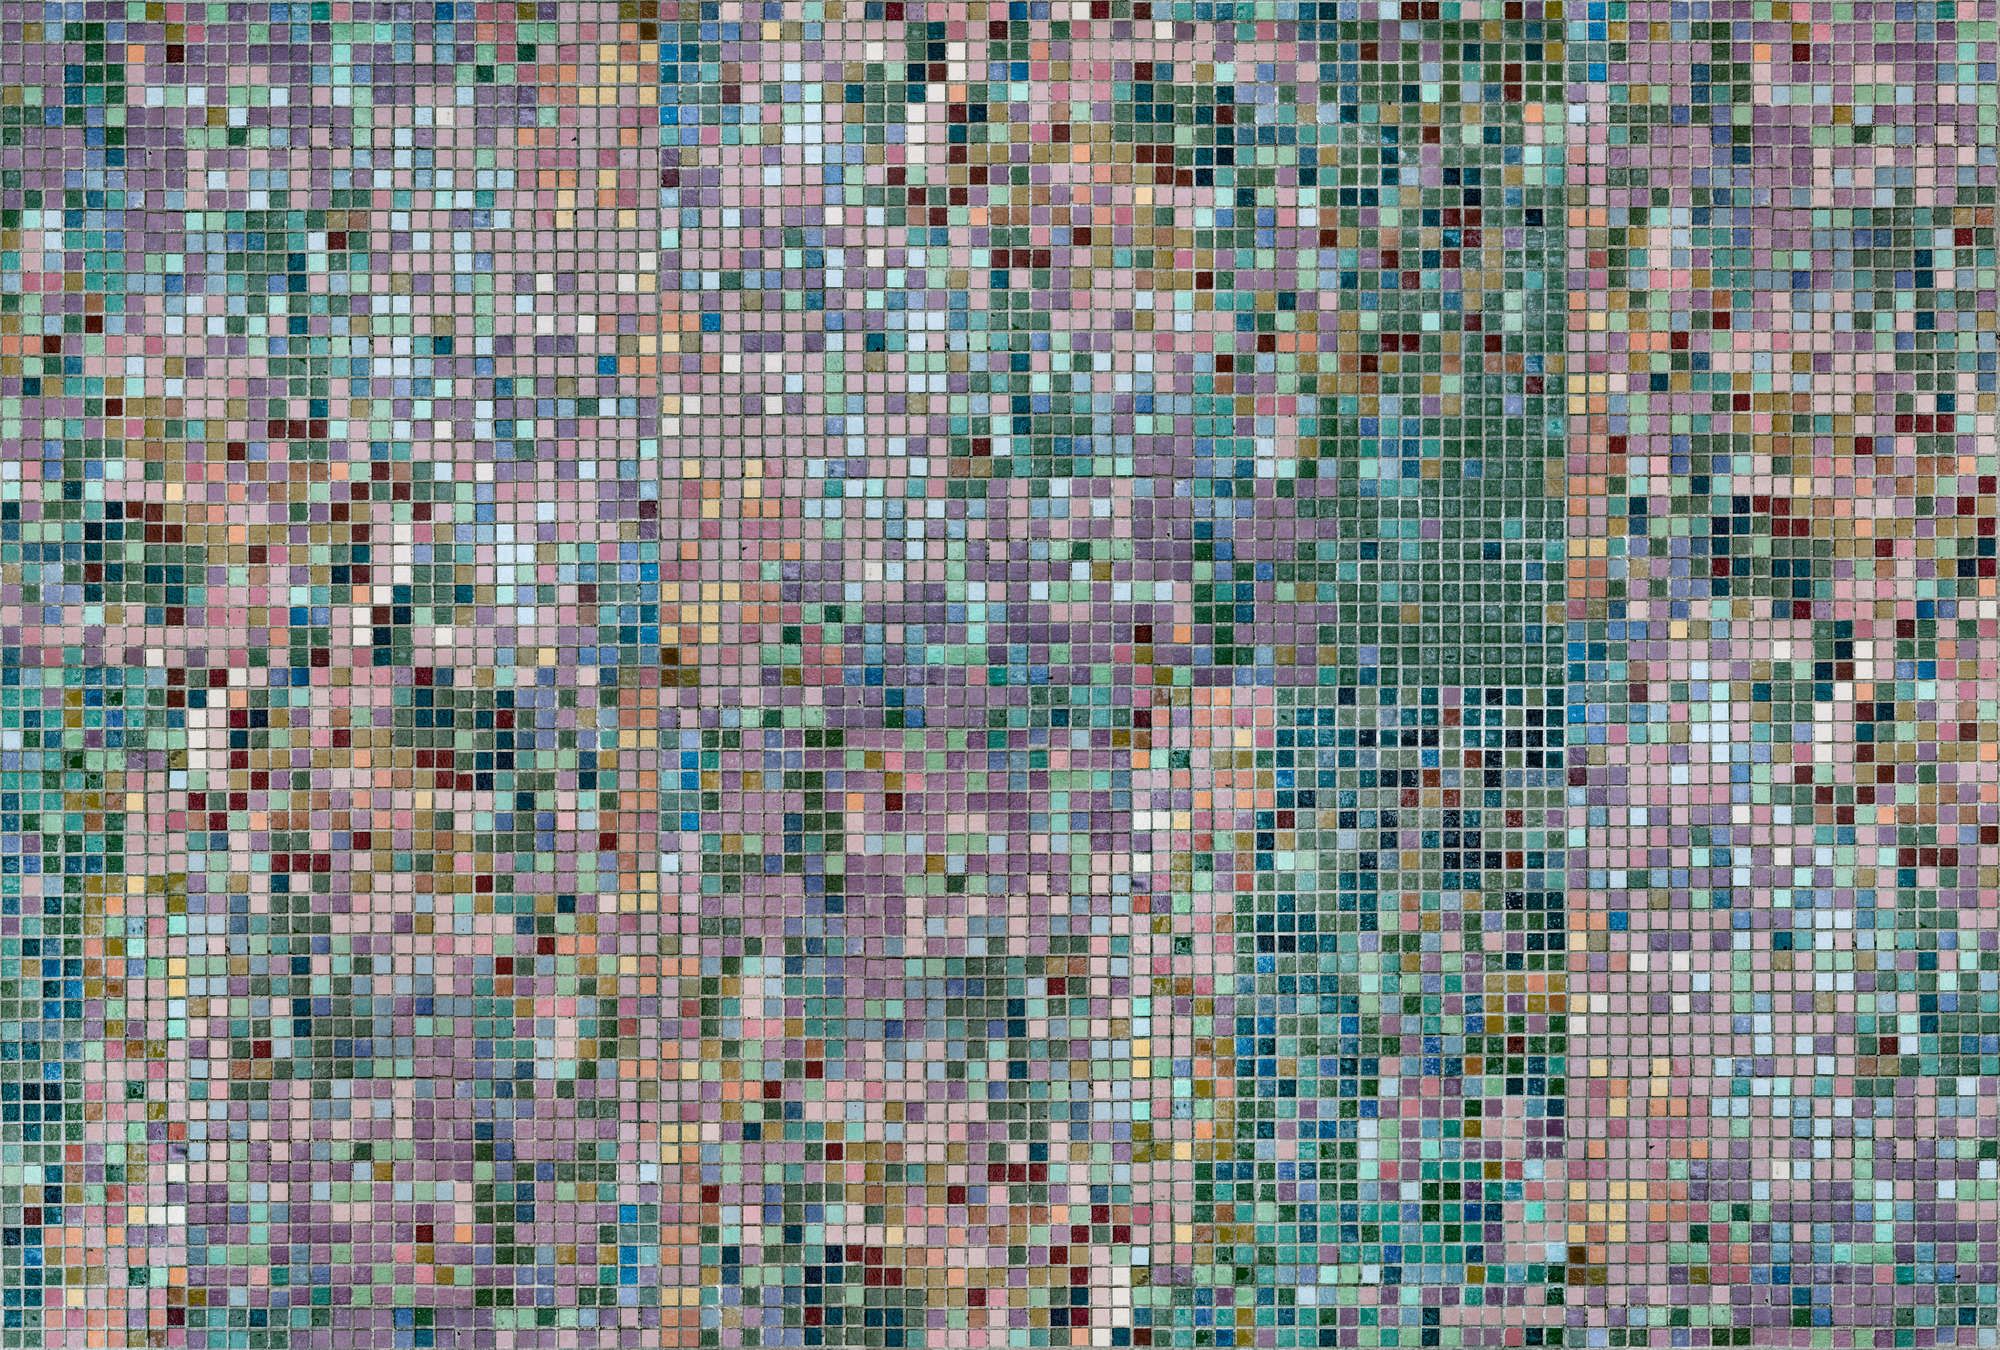             Photo wallpaper »grand central« - Mosaic pattern in bright colours - Lightly textured non-woven fabric
        